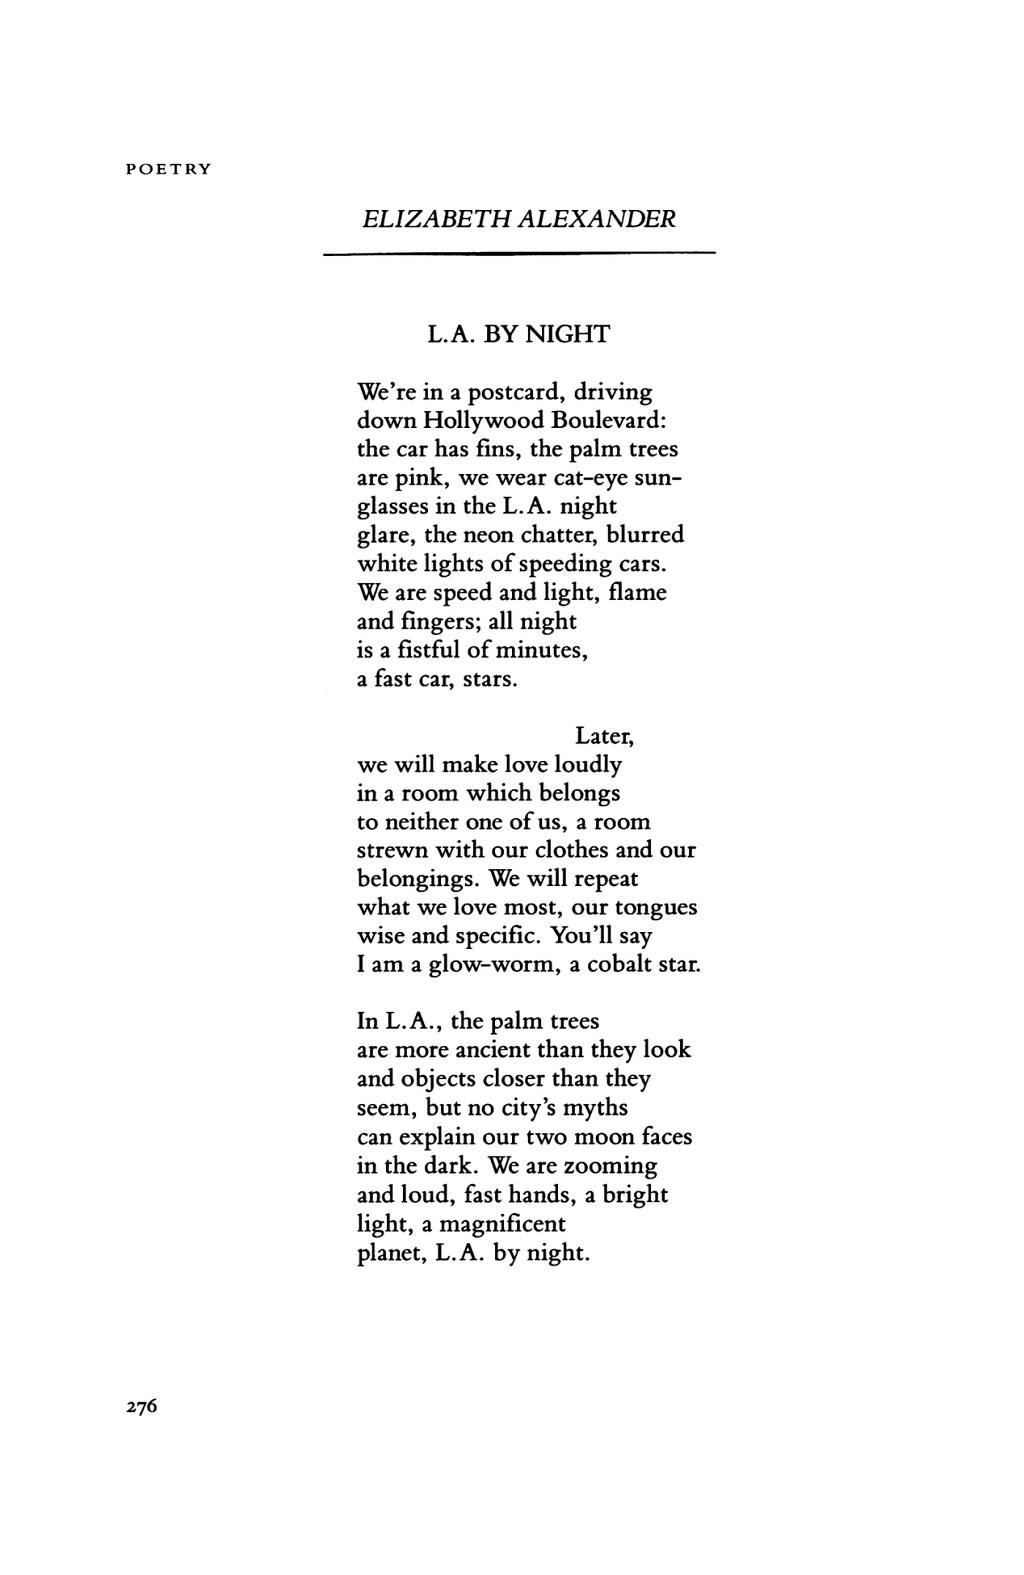 A poem by American writer Elizabeth Alexander that describes the city of Los Angeles seen at night